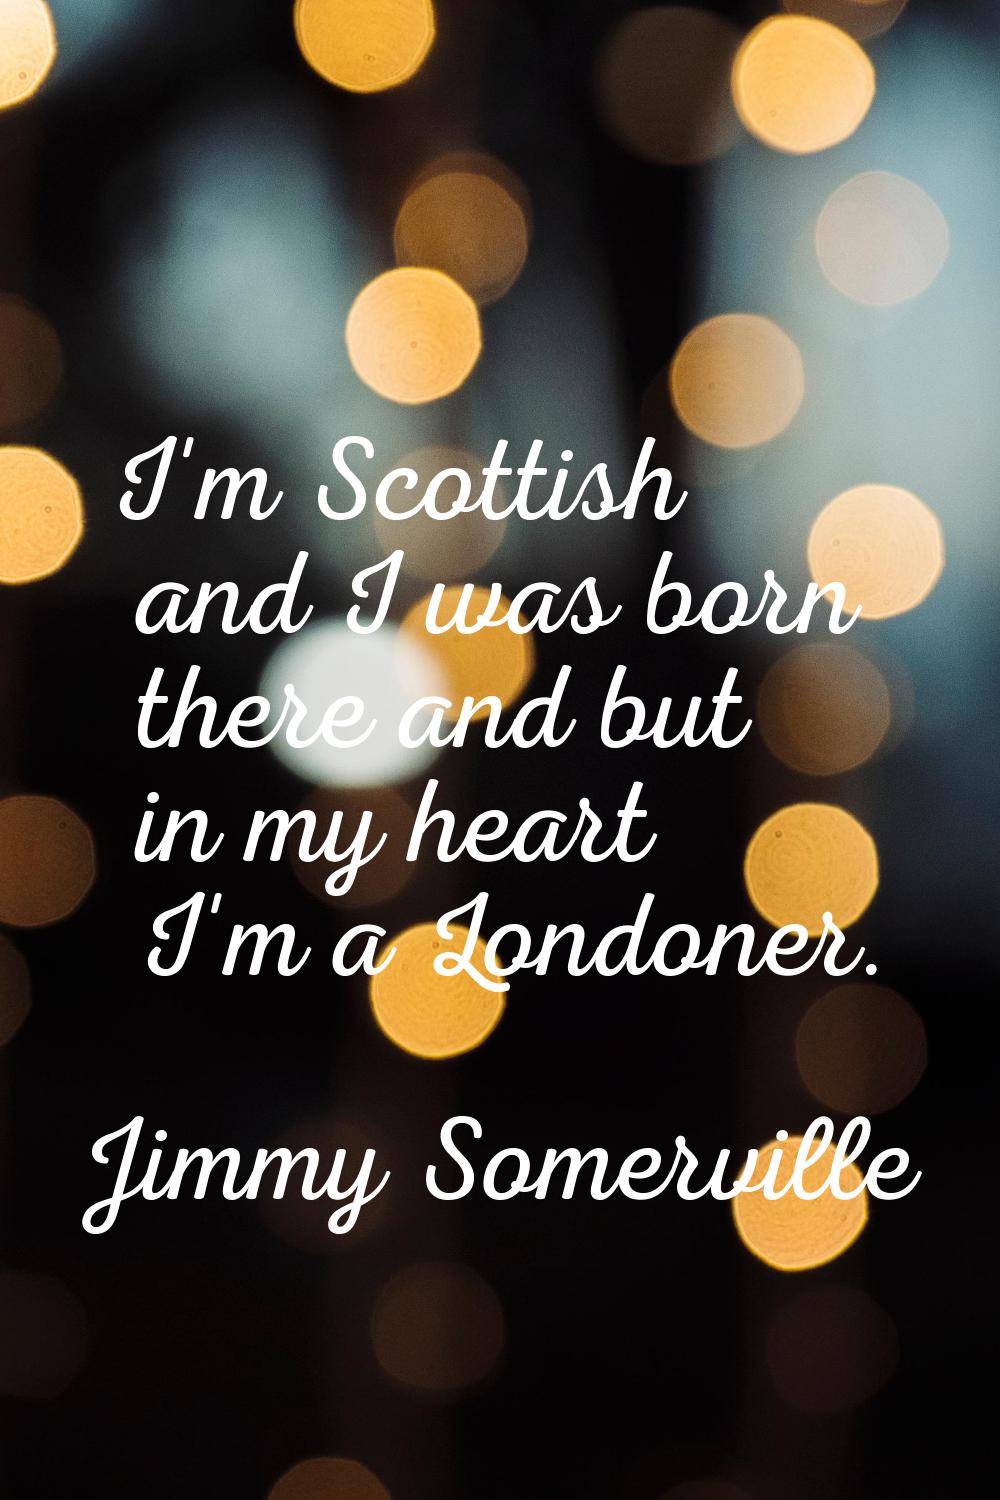 I'm Scottish and I was born there and but in my heart I'm a Londoner.